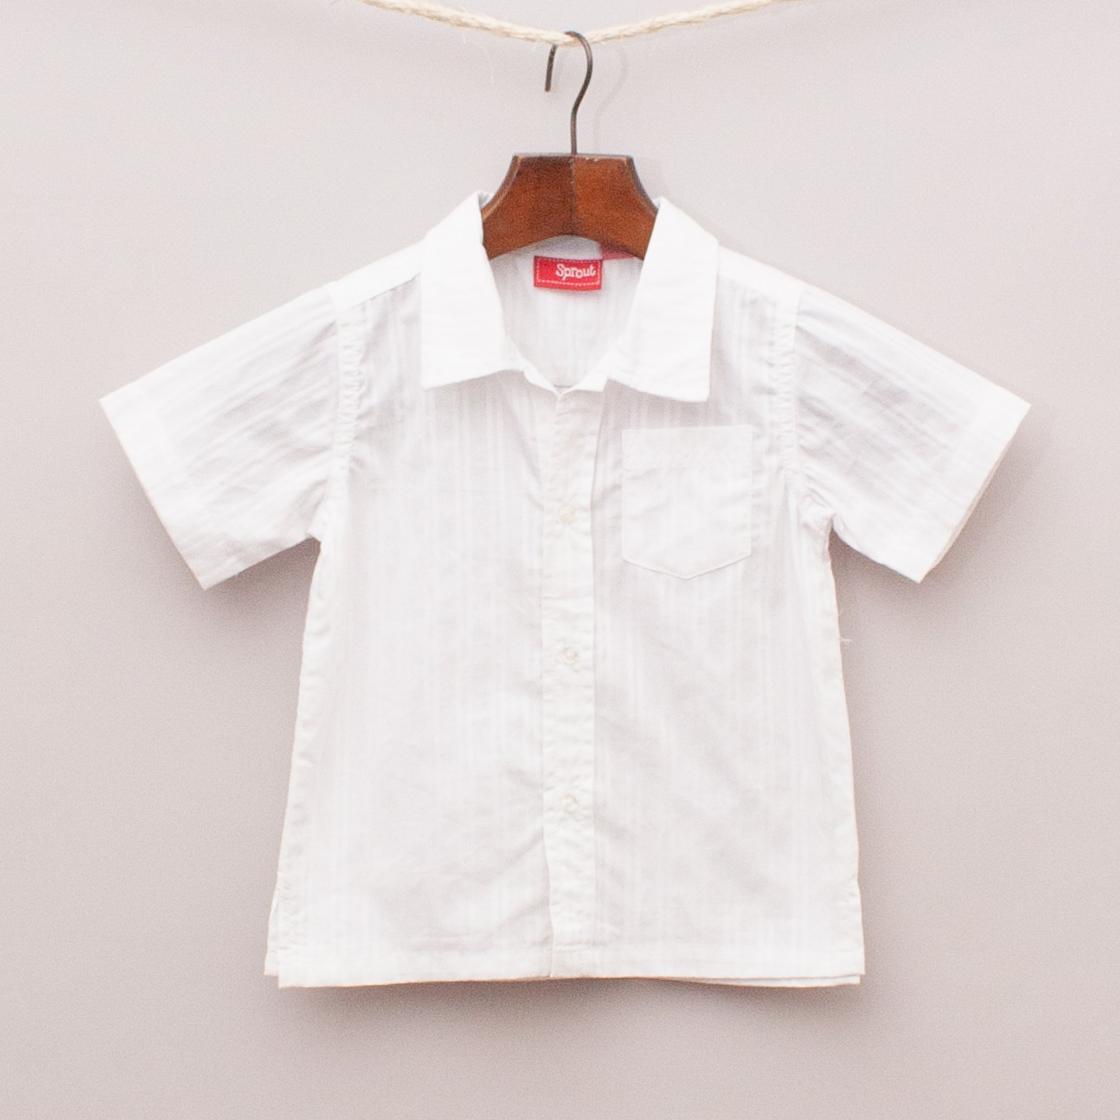 Sprout White Shirt "Brand New"